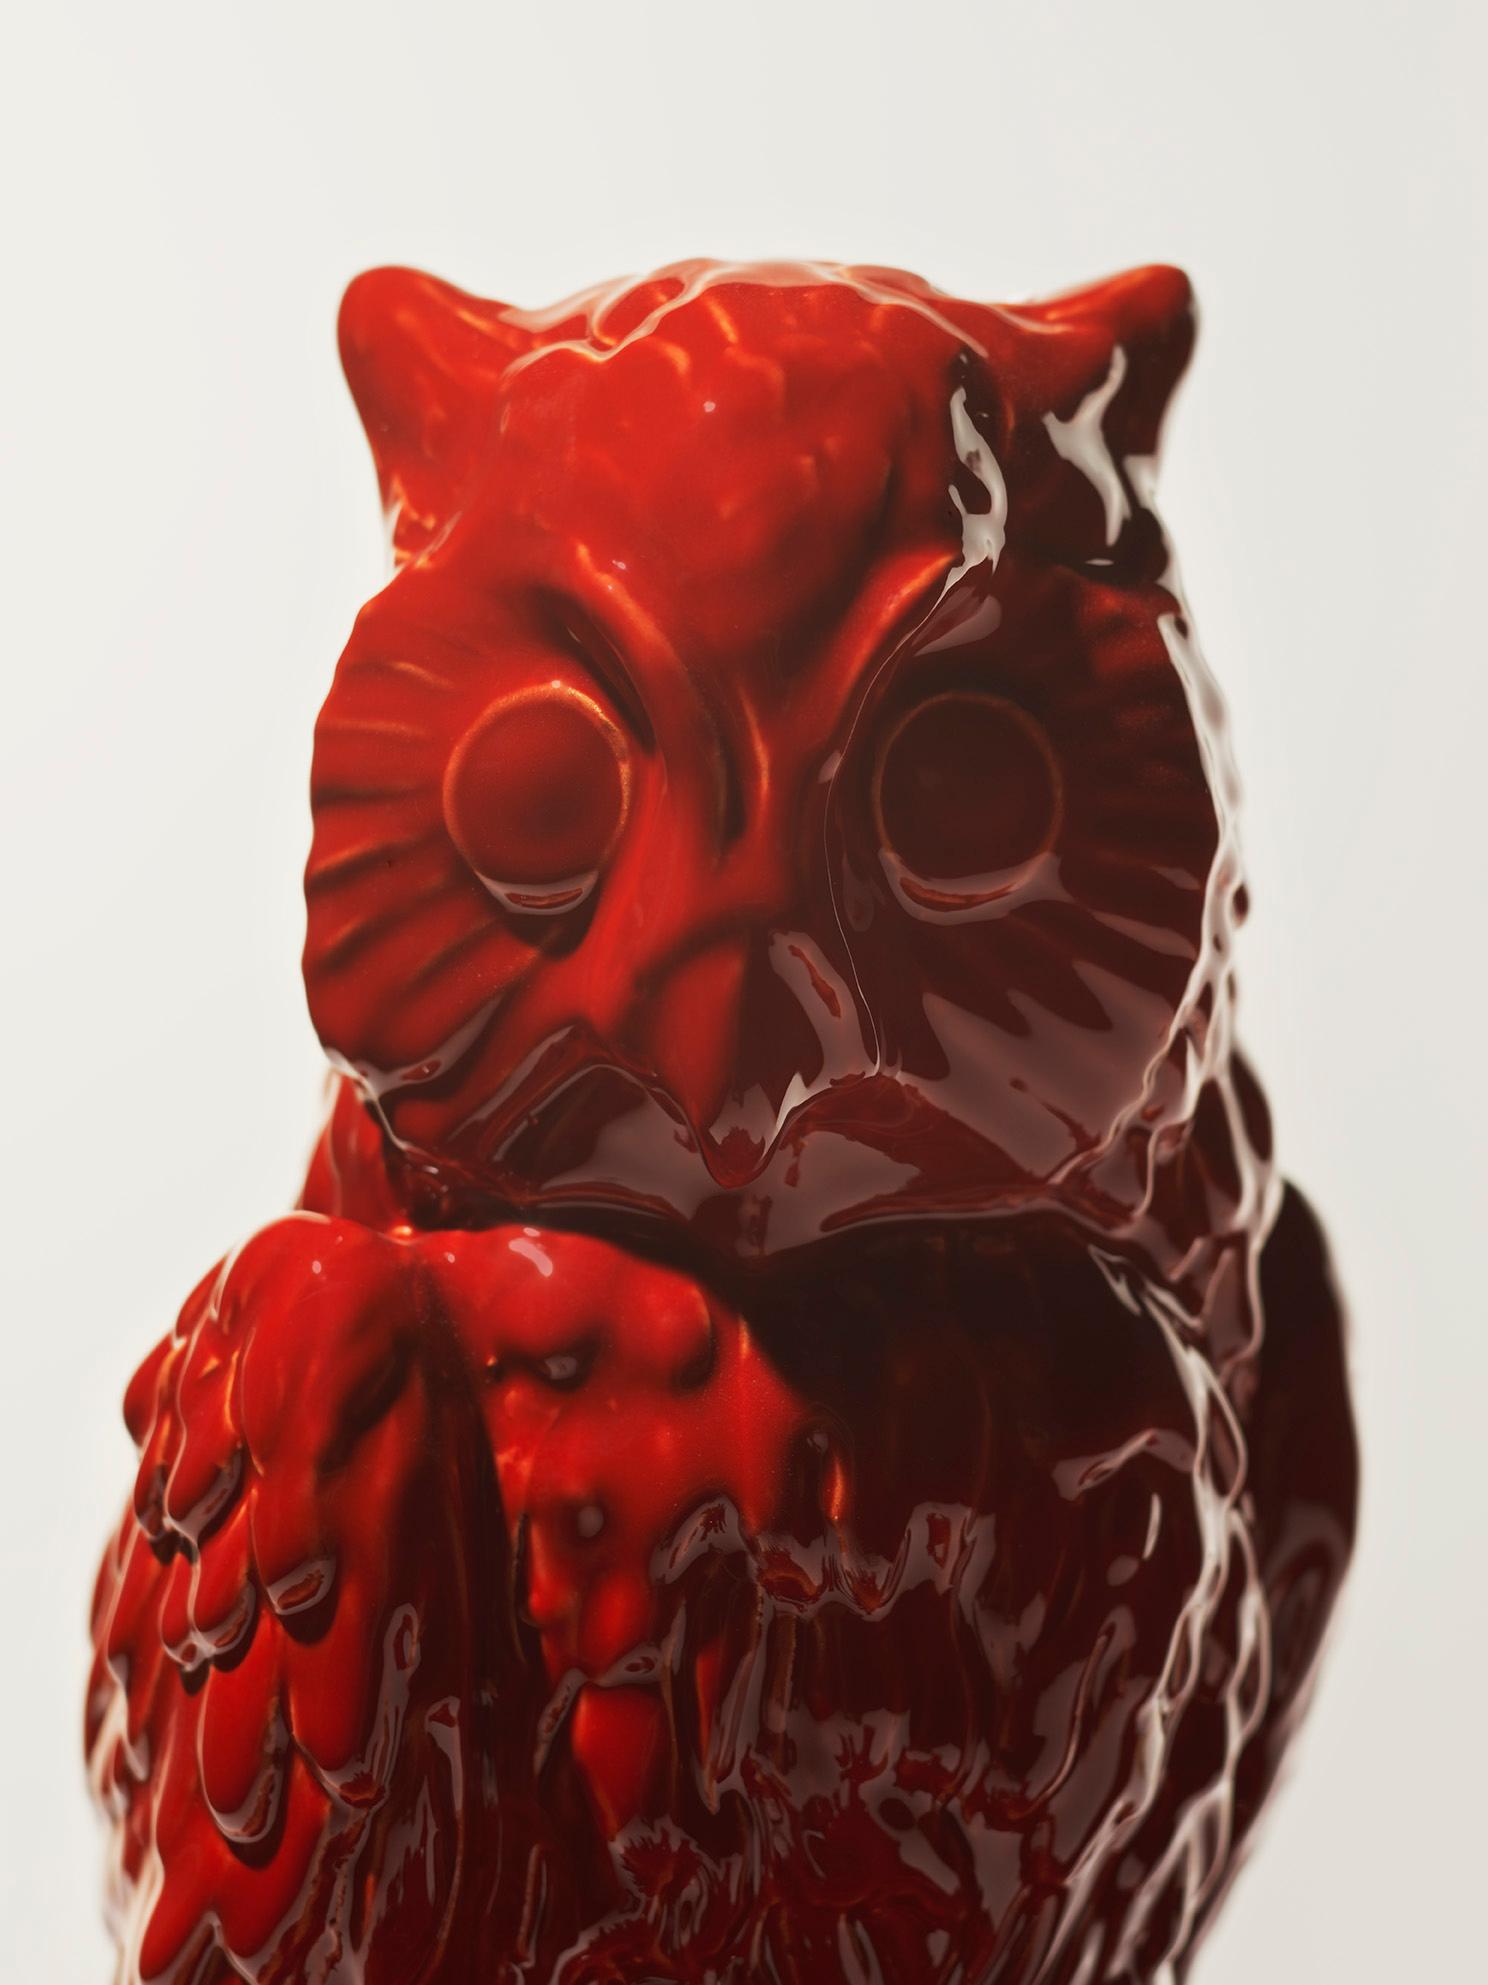 21st century high red frog sculpture by Ceramica Gatti, Italy. Unique piece made in Italy, this pottery piece was designed by Andrea Anastasio at the historical Bottega Ceramica Gatti 1928 in Faenza, specialized on creating ceramic art, that goes